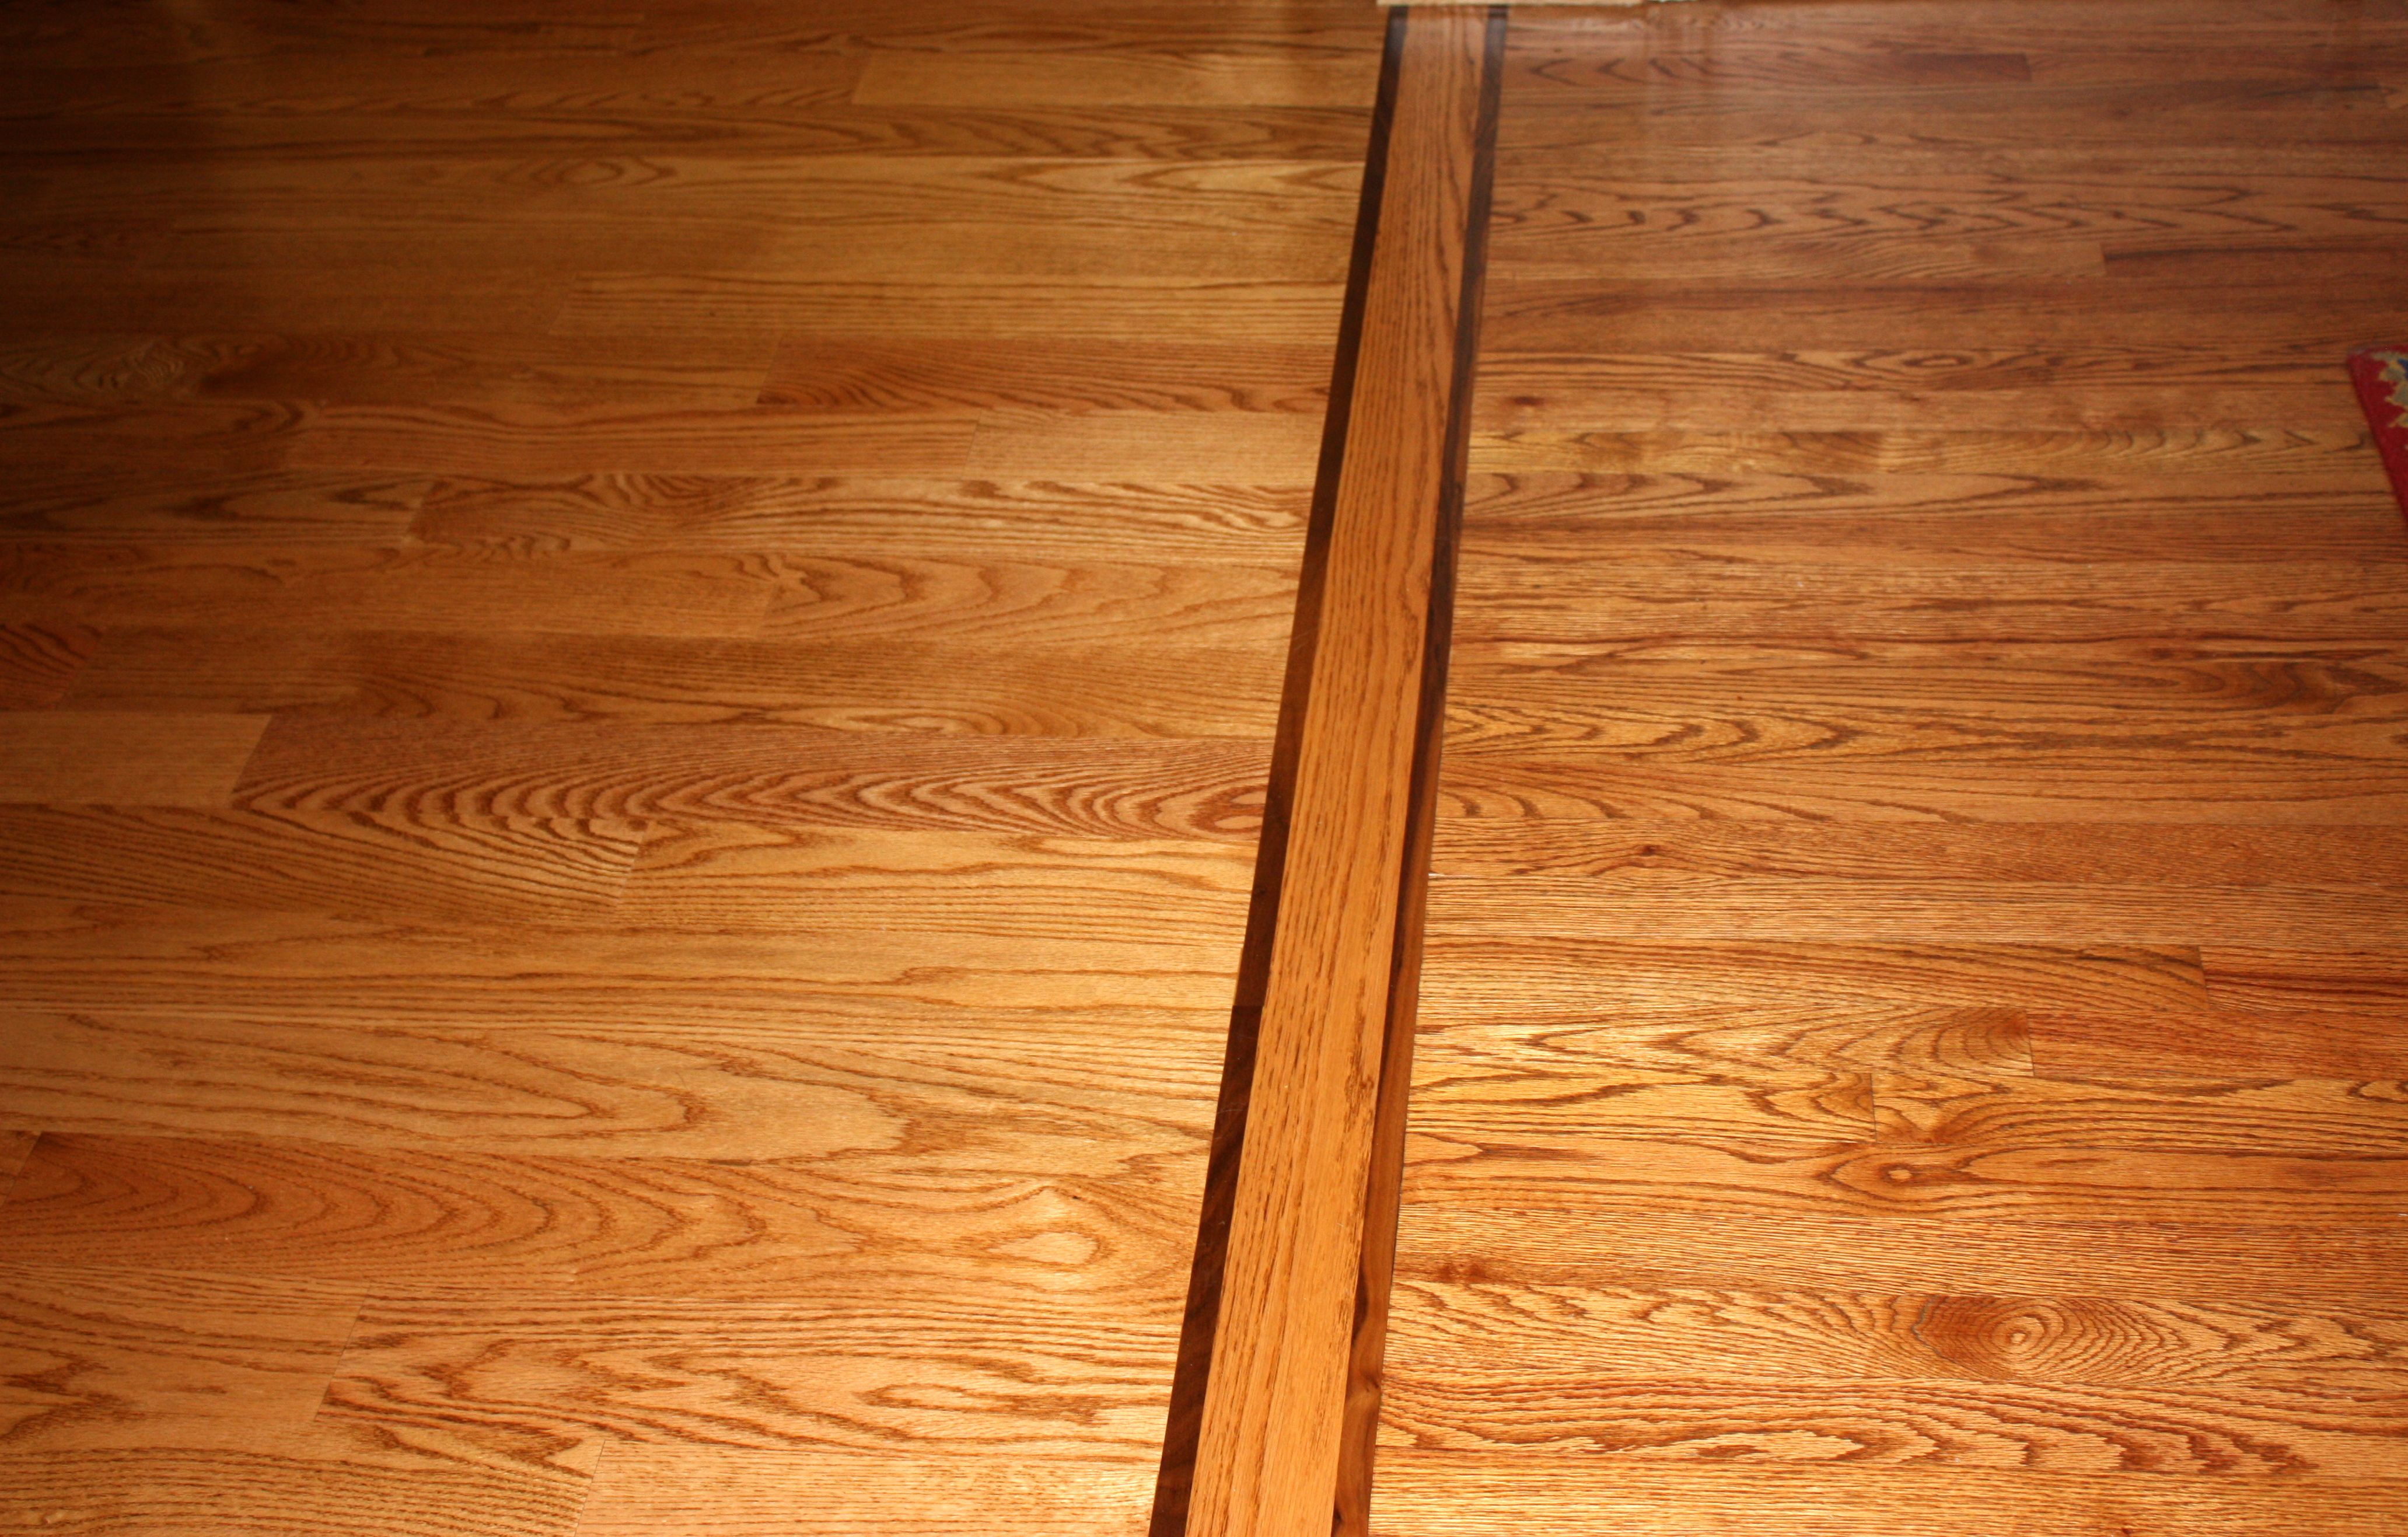 Matching An Existing Hardwood Floor, Hardwood Floor Transition From One Room To Another